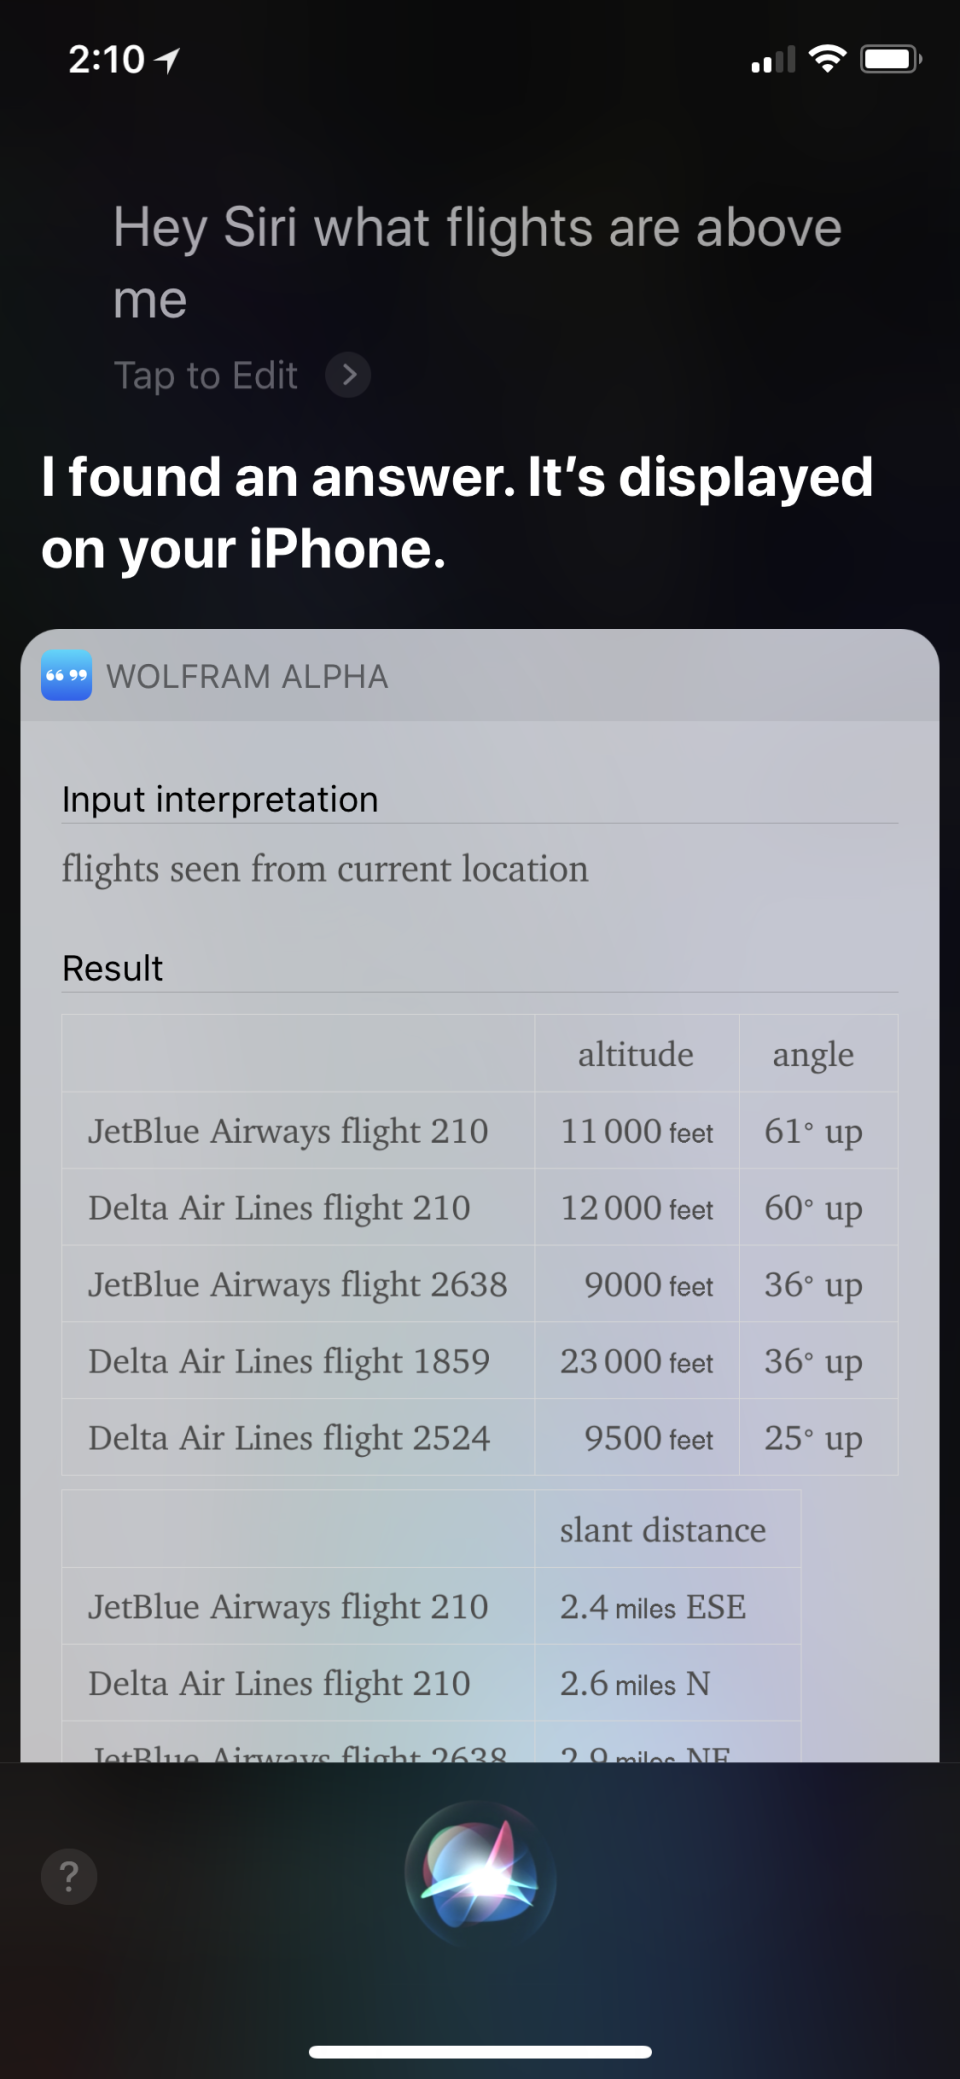 Siri showing flight numbers in response to question "Hey Siri what flights are above me?"